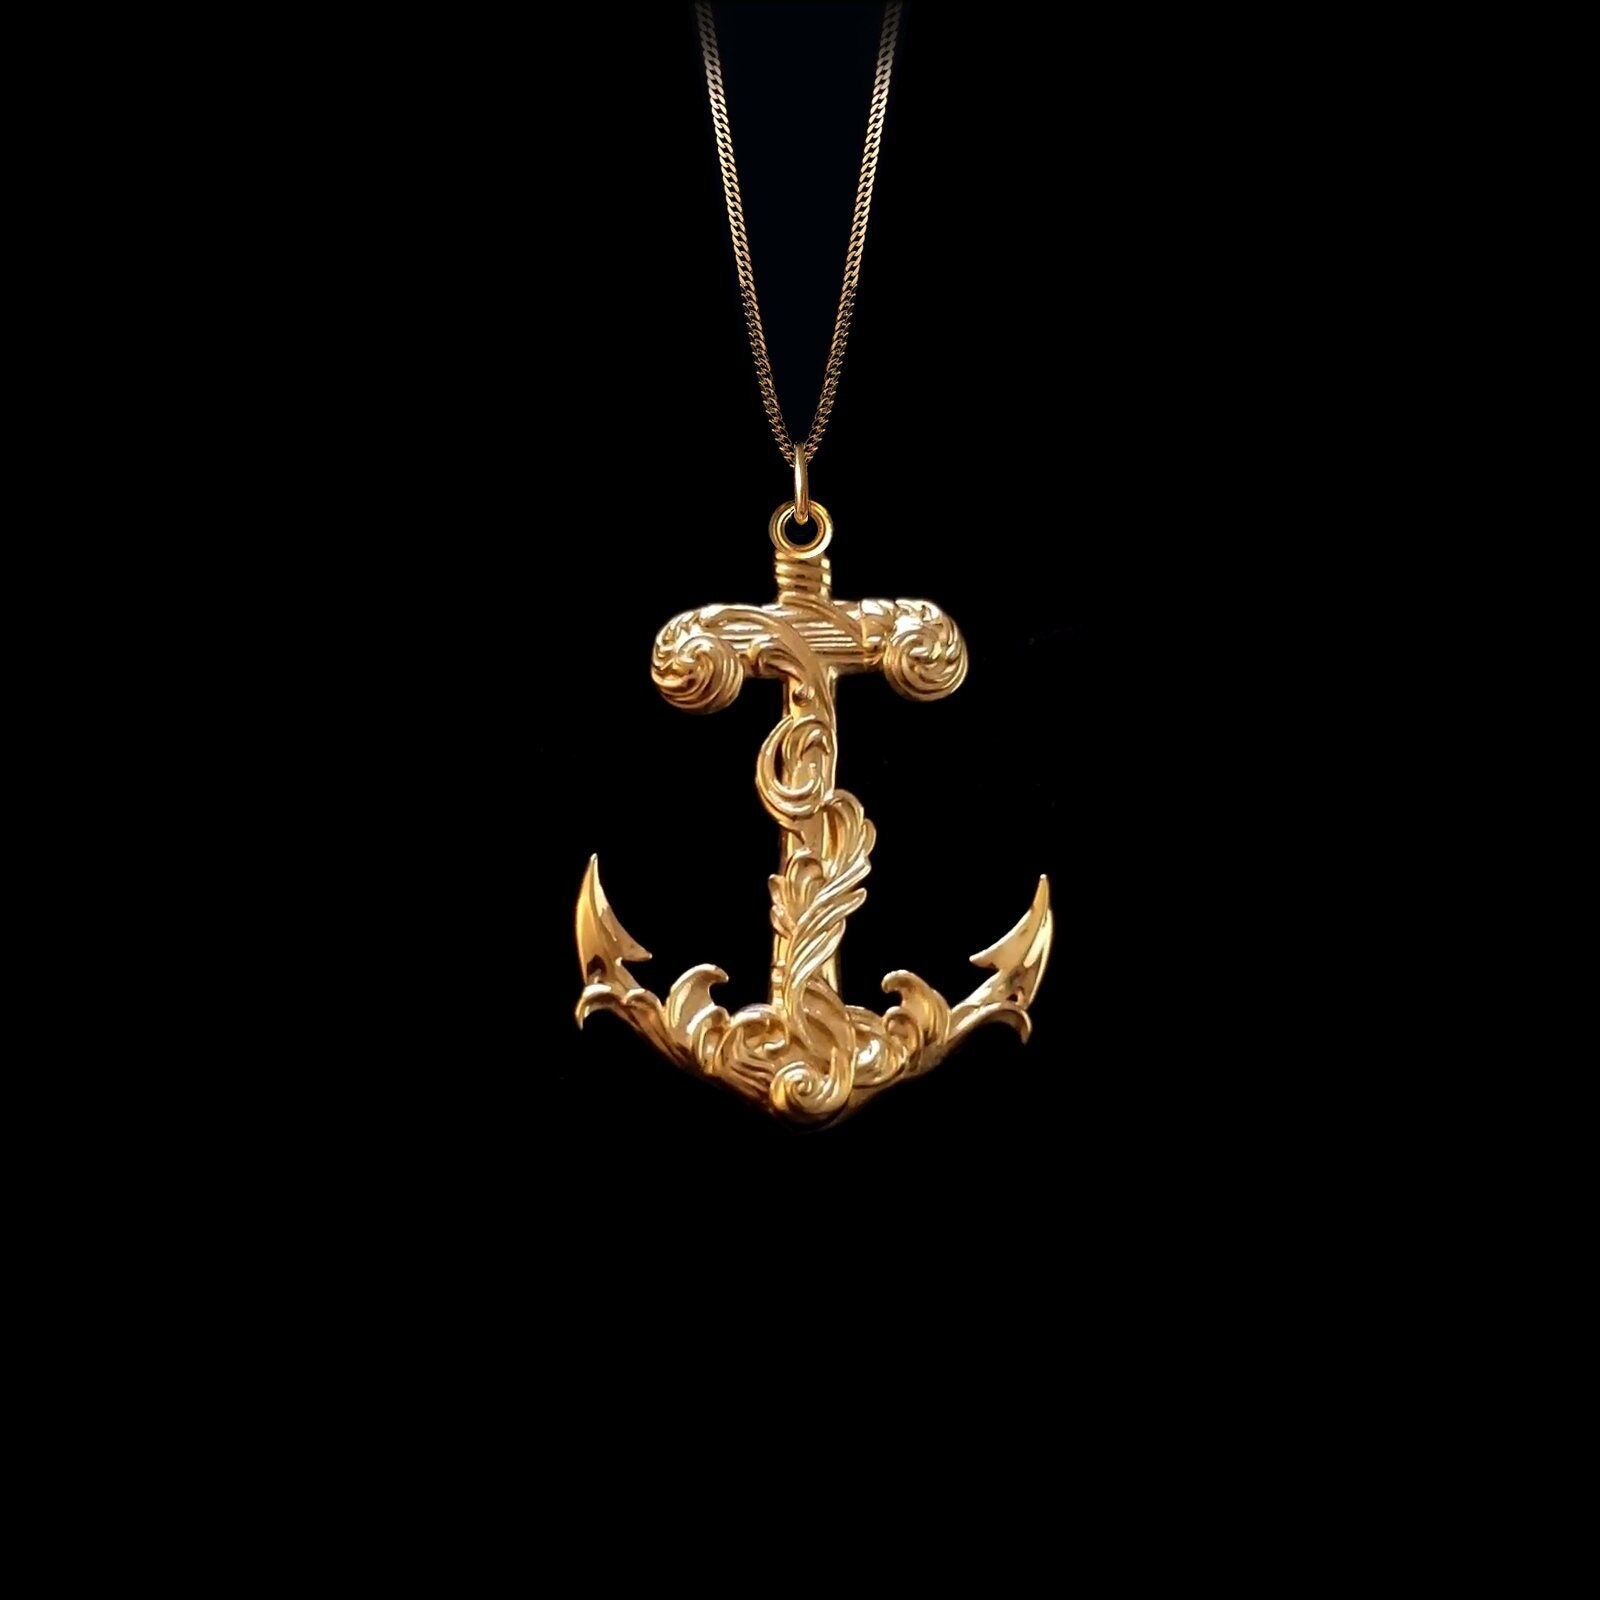 Two-Tone Gold Diamond Nautical Rope Anchor Pendant Necklace